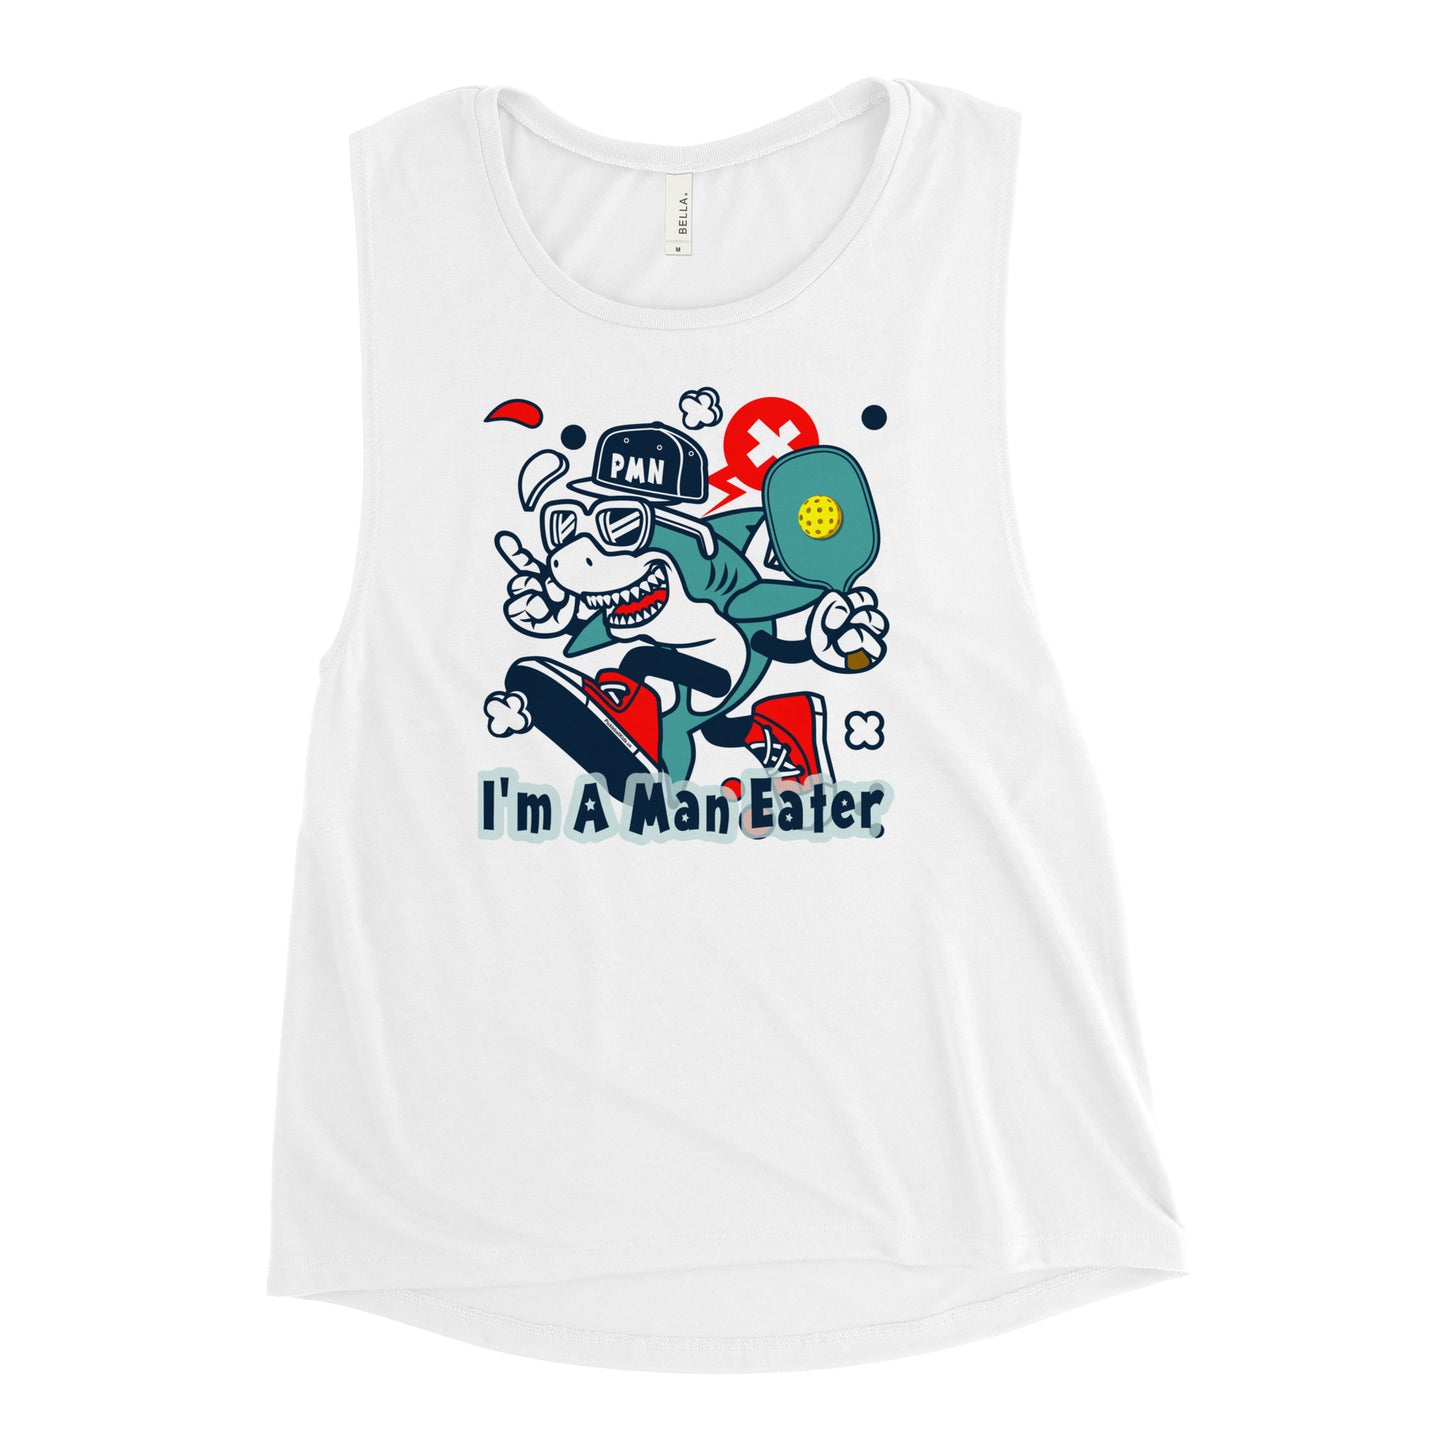 Ladies’ Best Pickleball Muscle Tank Top, "I'm A Man Eater."